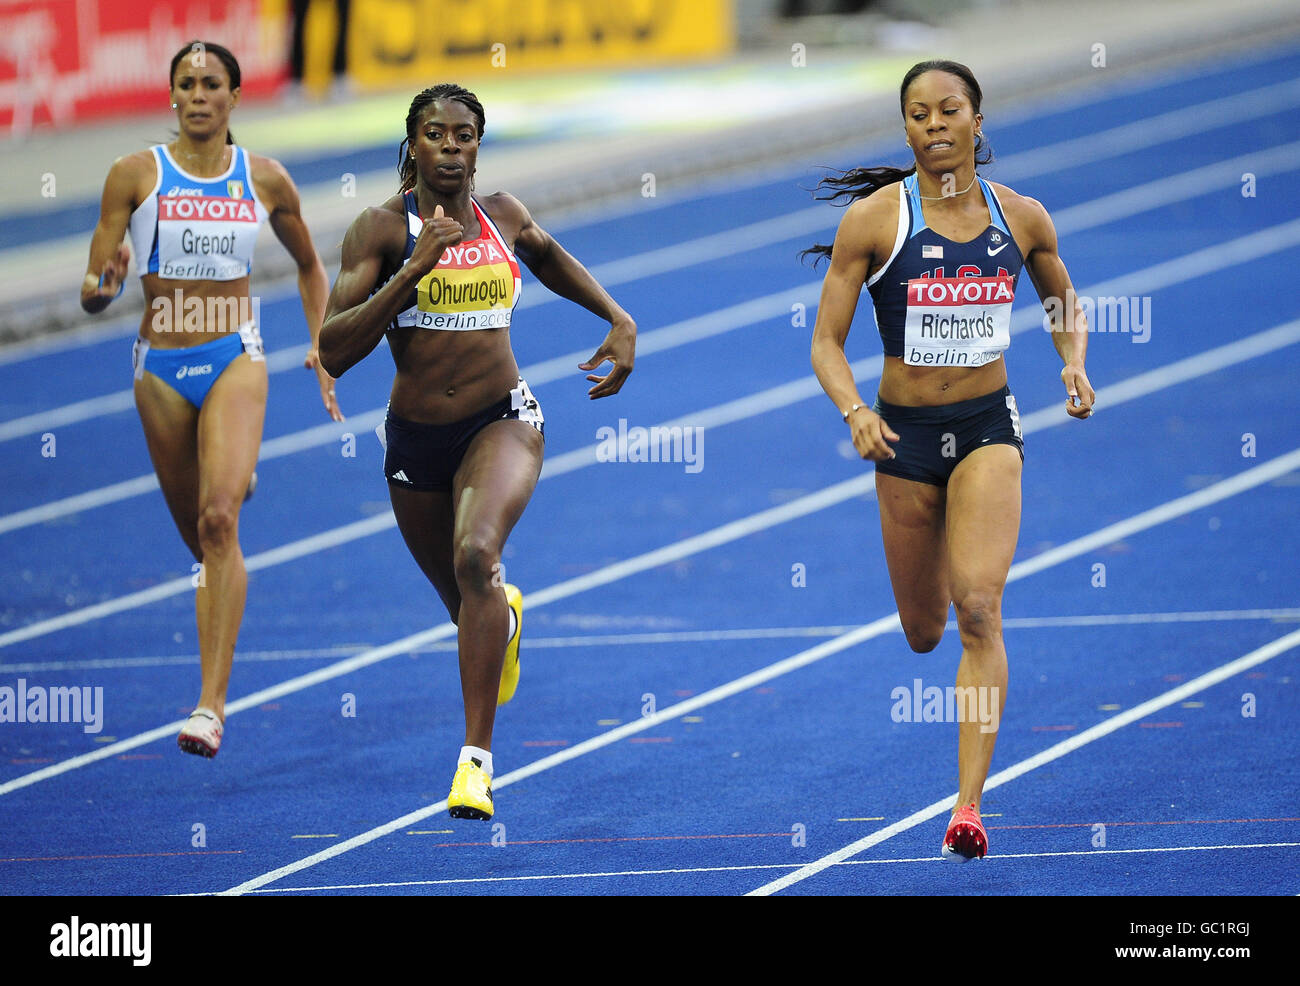 Great Britain's Christine Ohuruogu (centre) and her main rival Sonya Richards(right) race together in their semi final for the Womens 400m during the IAAF World Championships at the Olympiastadion, Berlin. Stock Photo